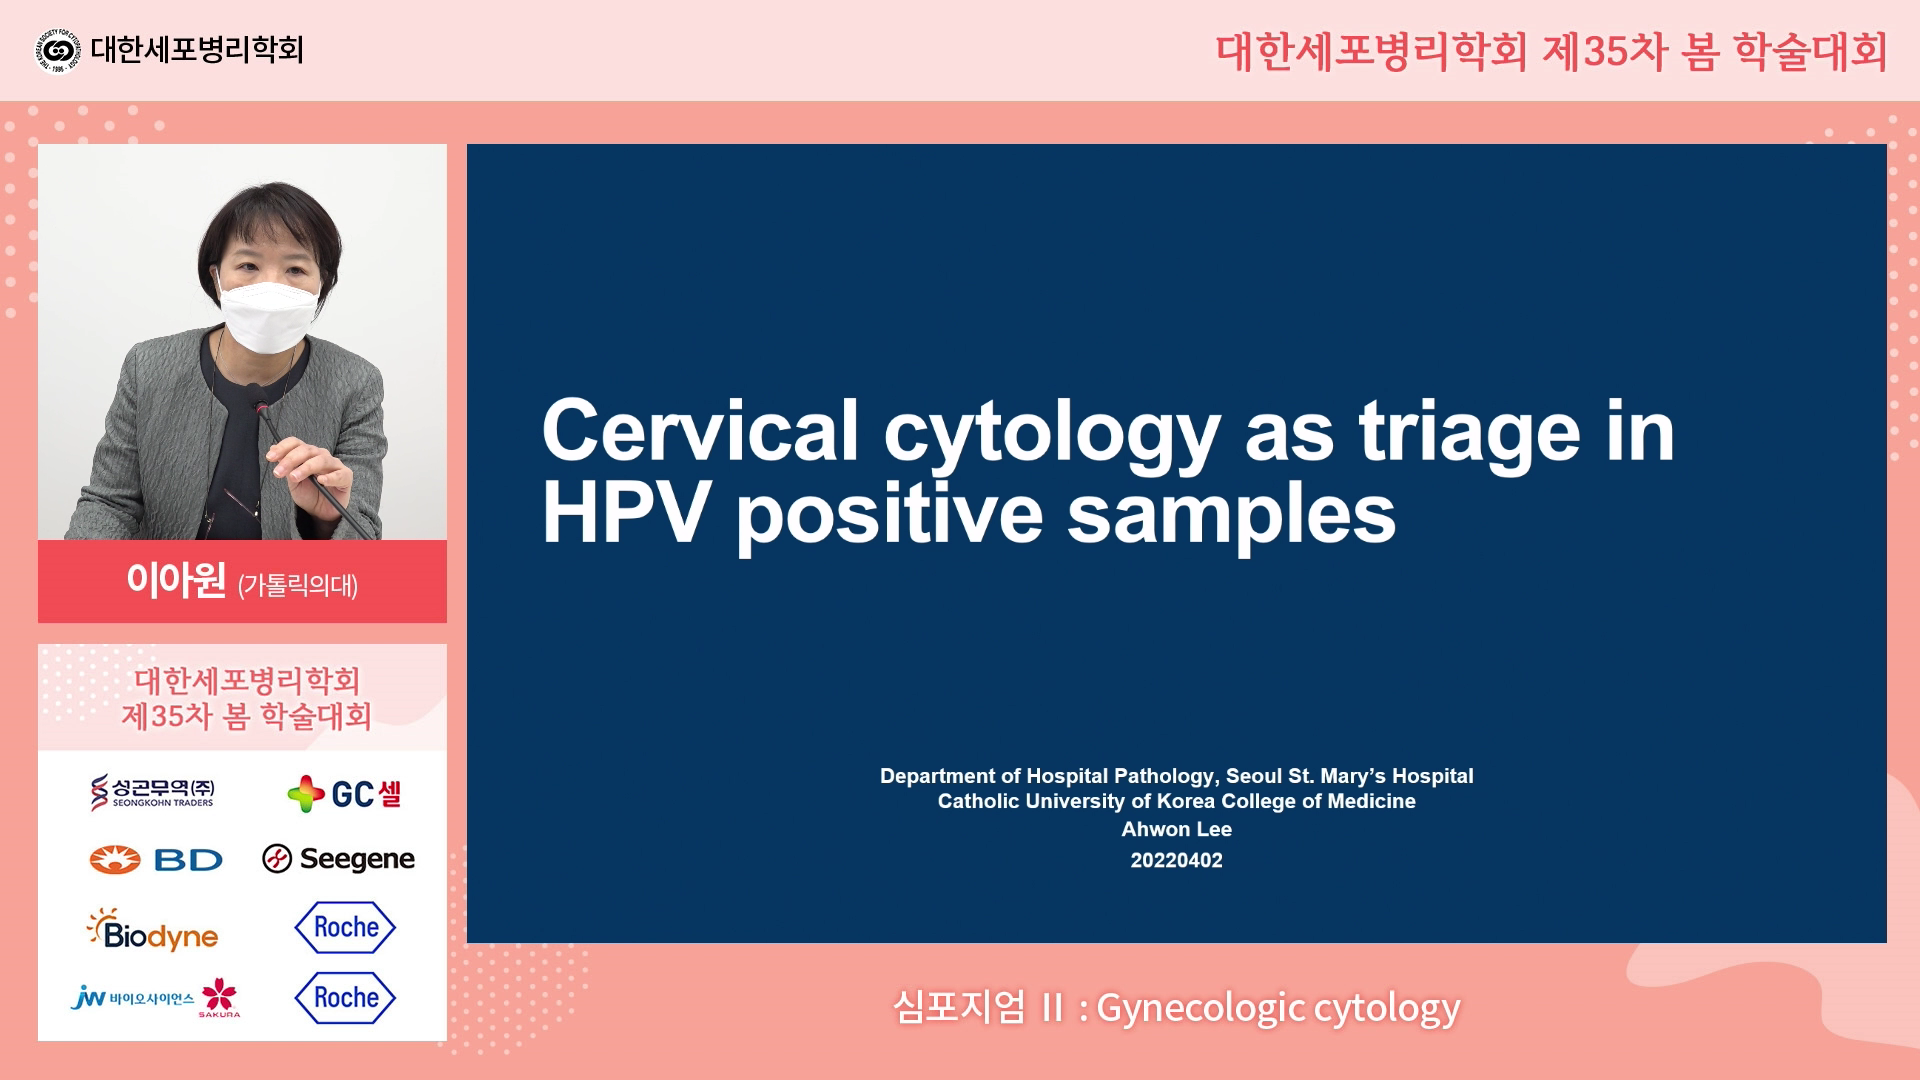 Cervical cytology as triage in HPV positive samples